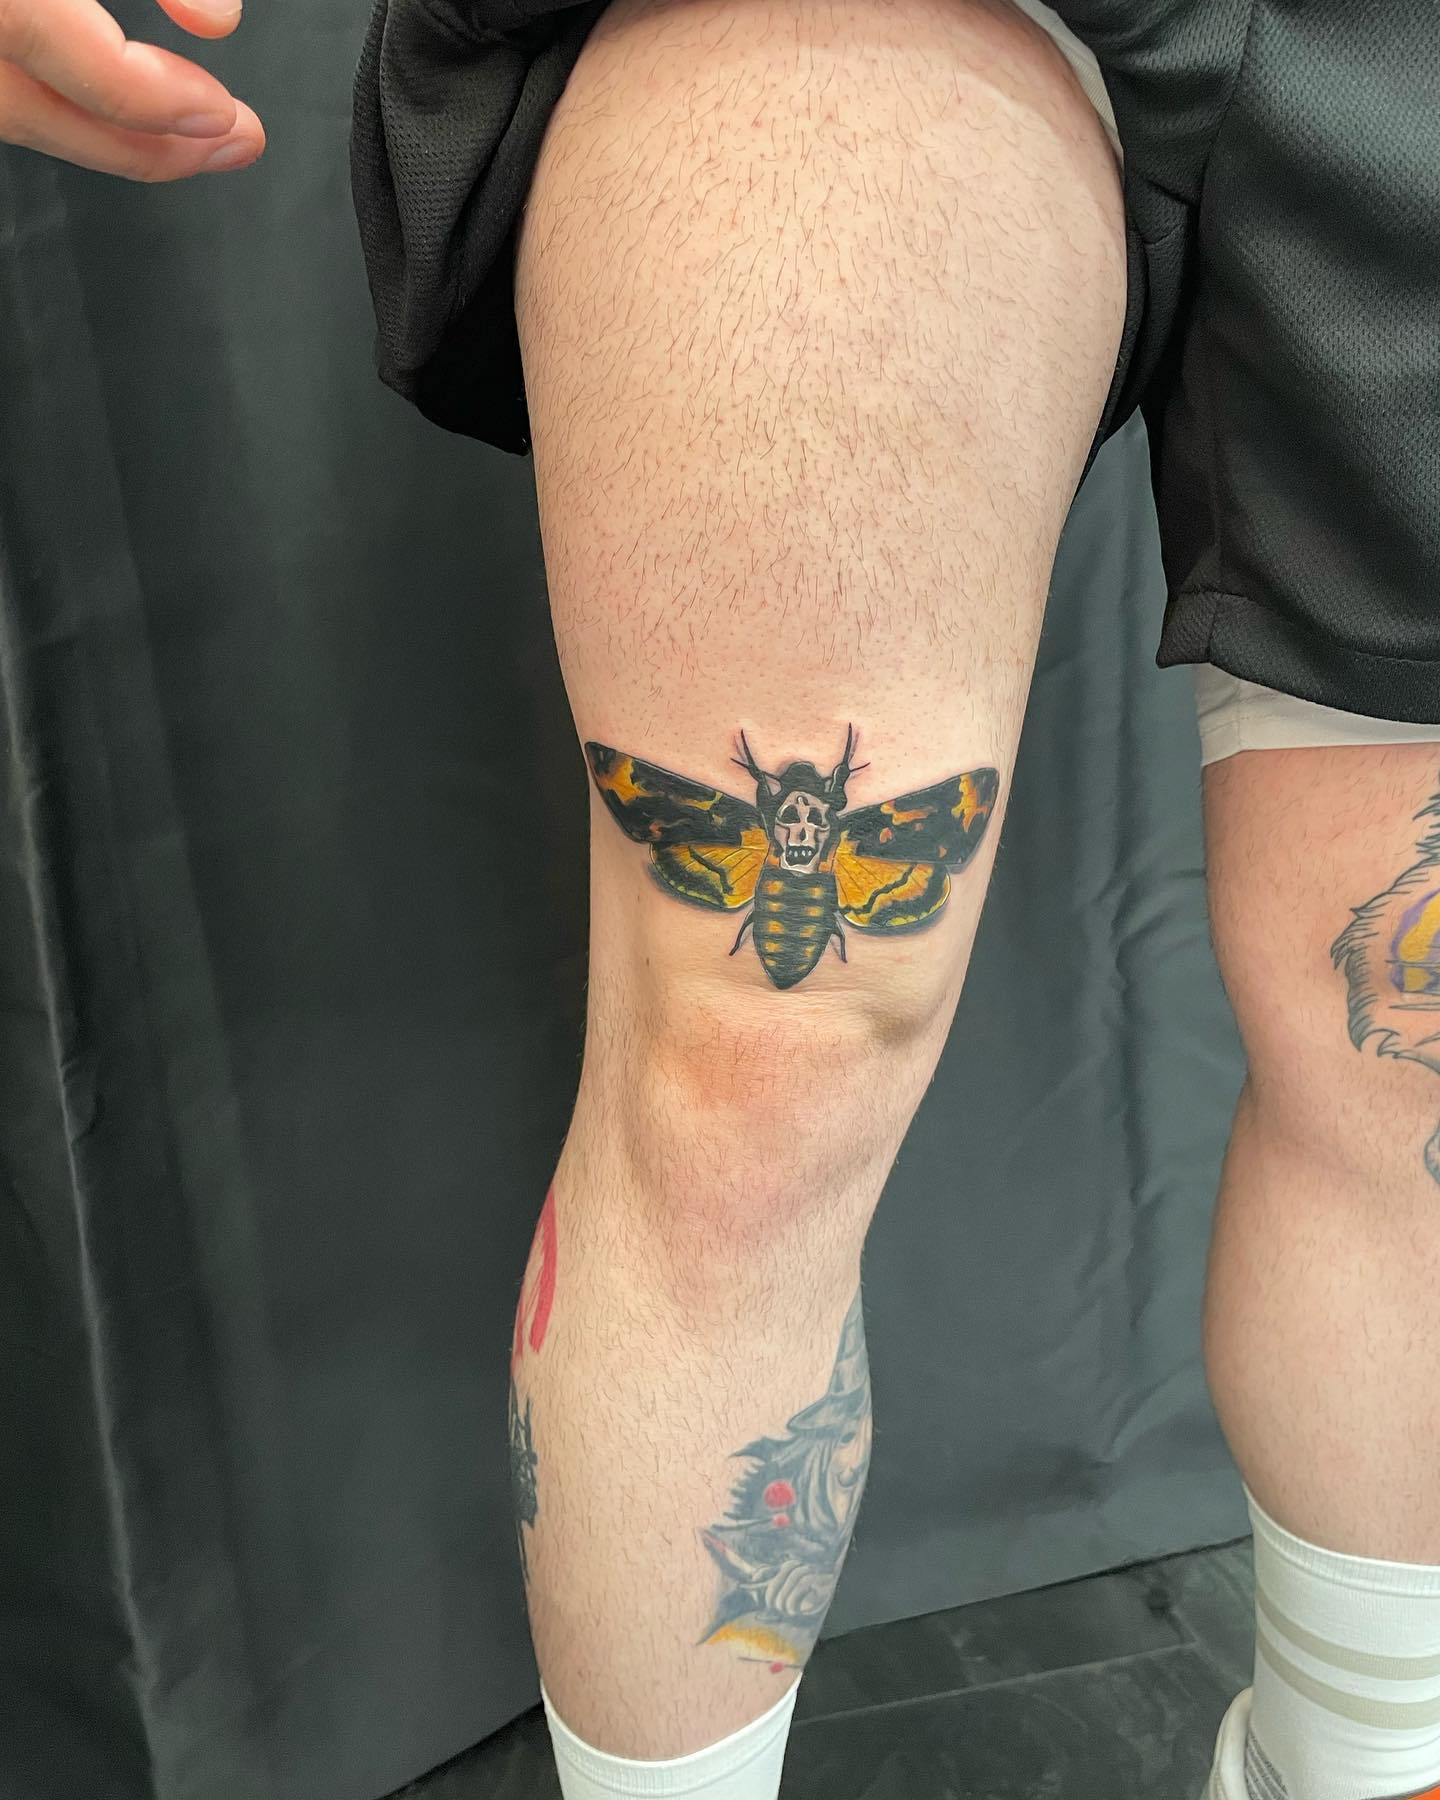 This cool thigh tattoo is for guys who work out. Does this apply to you? If you’re someone who likes loud ideas and you wish to show off your quads, this is the way to do it. If you’re a fan of colorful ideas, try this out.